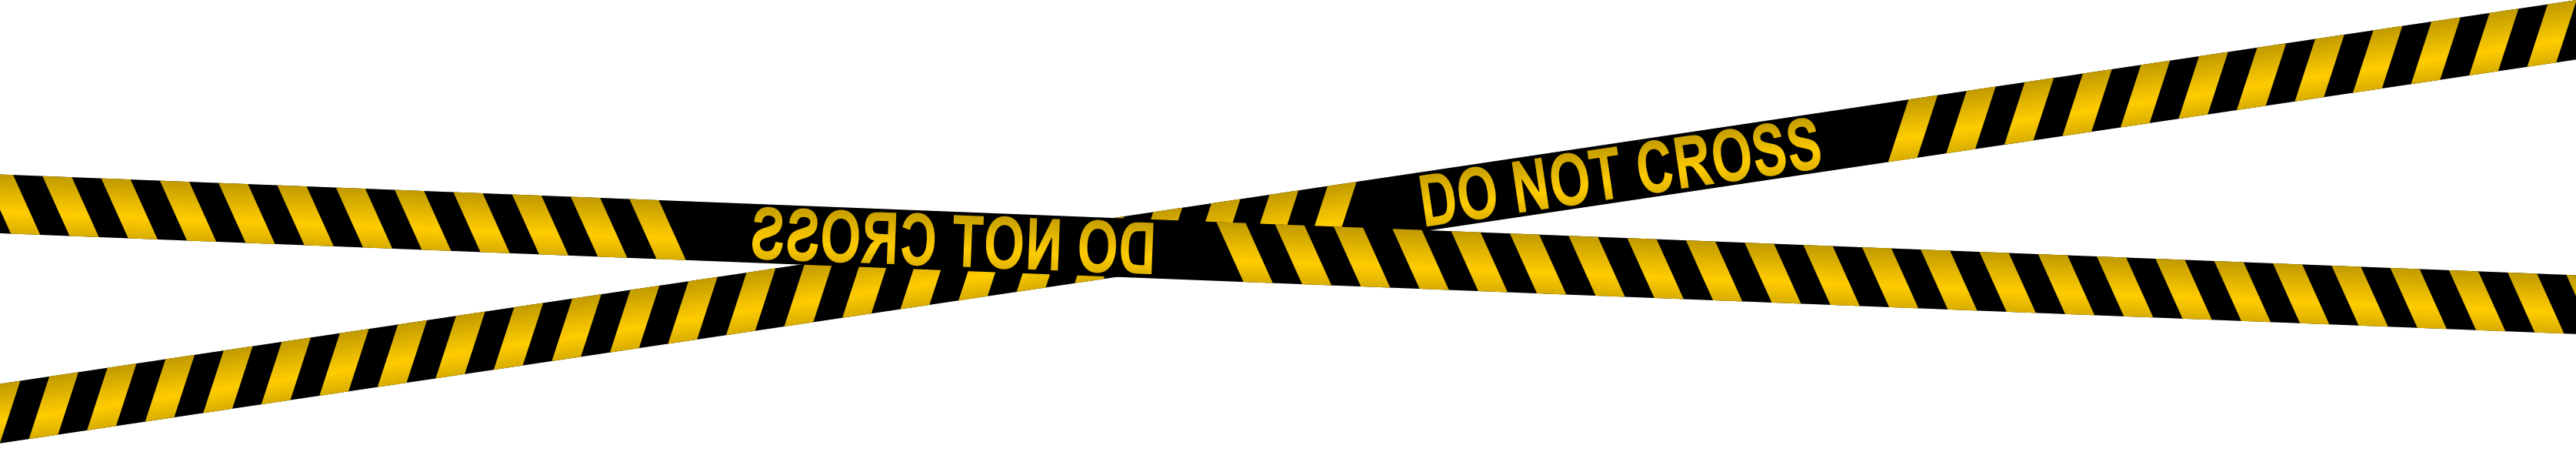 Yellow Caution Tape PNG HD Quality